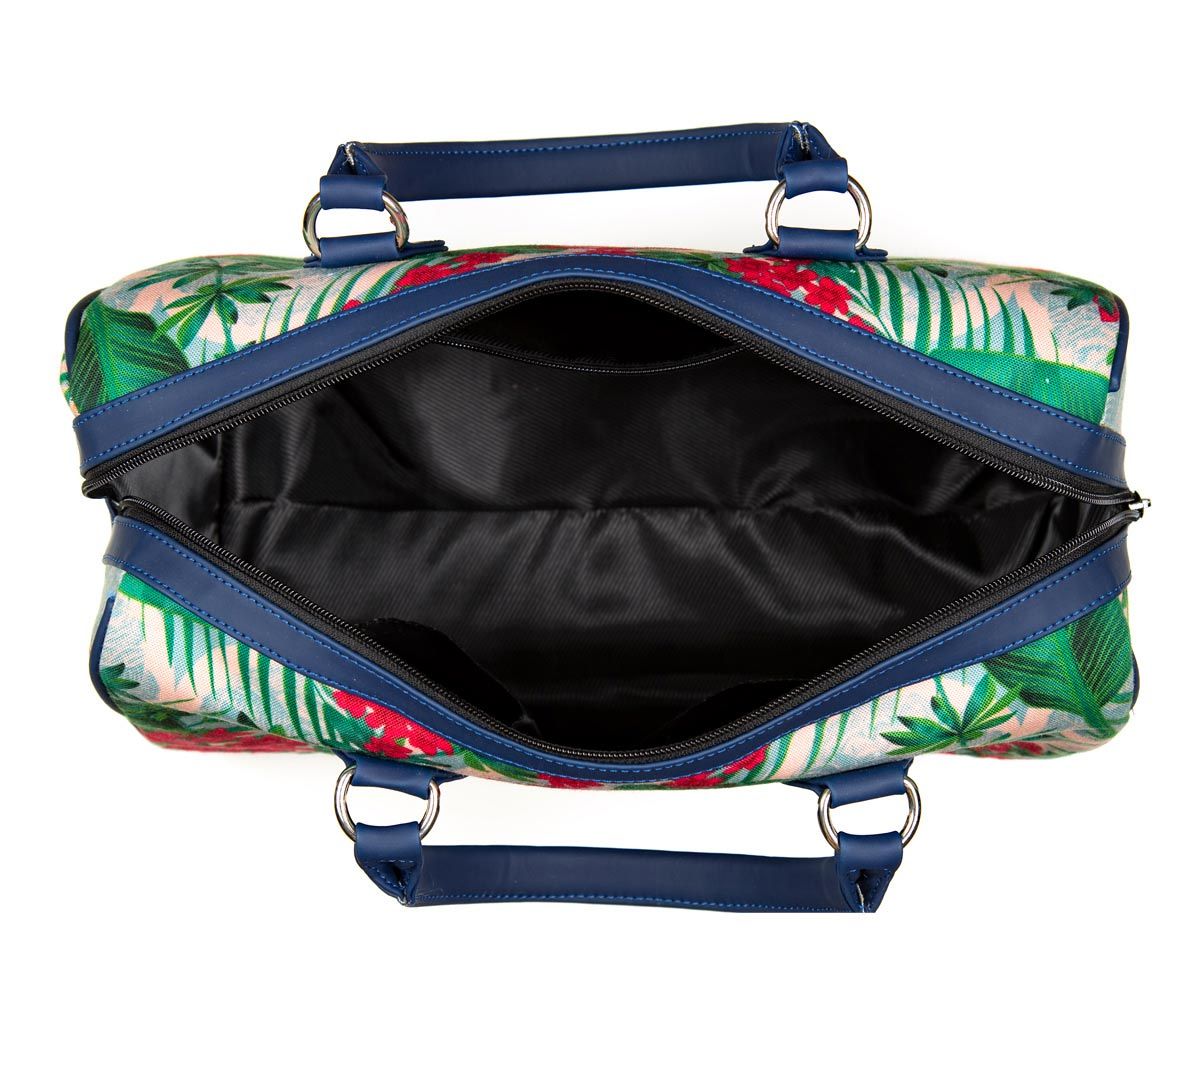 Shop for the Best Duffle Bags online | India Circus